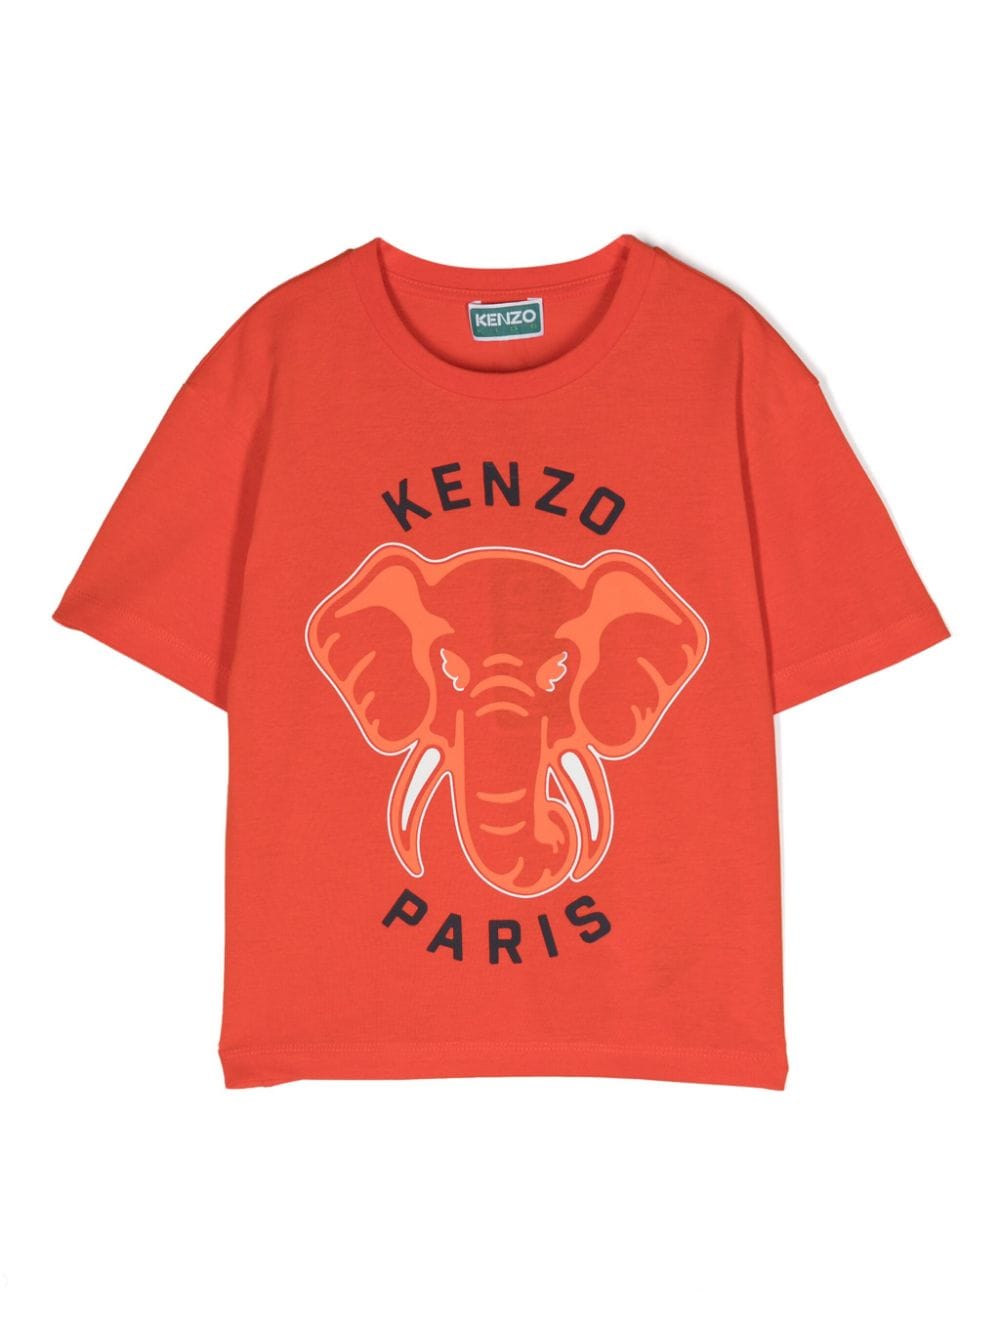 Kenzo Kids' Orange T-shirt For Boy With Elephant In Red